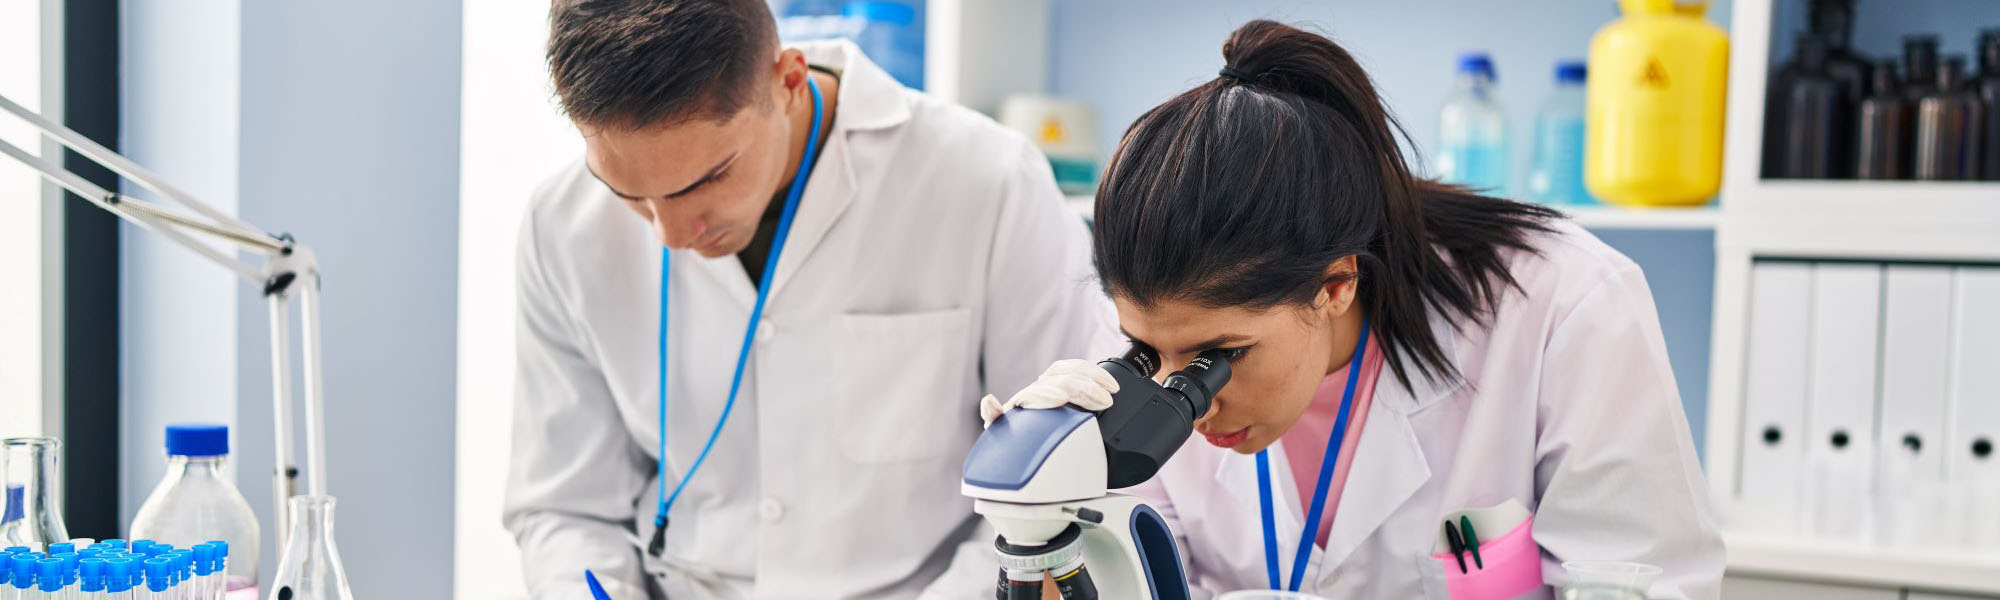 Two scientists, a man and a woman, work in lab, working with a microscope